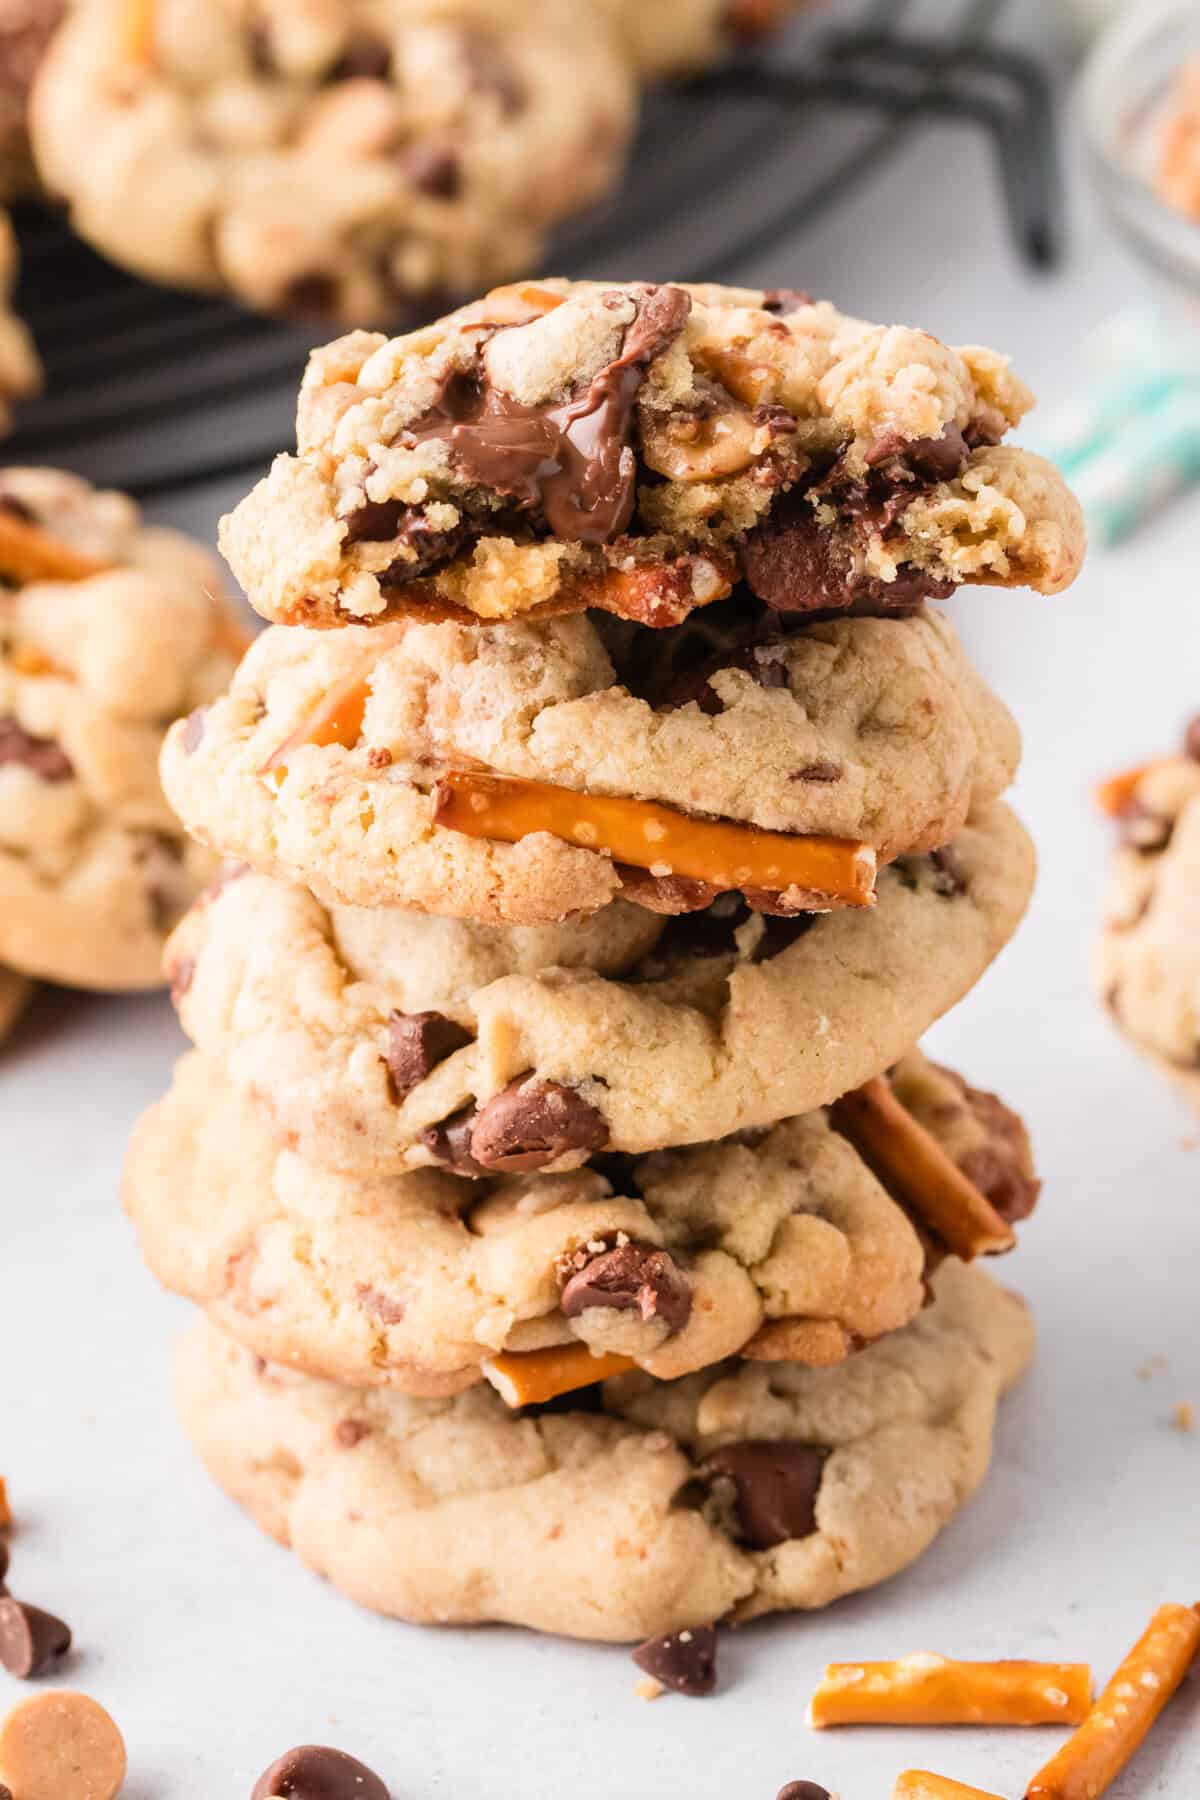 Everything but the kitchen sink cookies stacked on top of one another with a bite taken out of the top cookie to show melted chocolate chips.